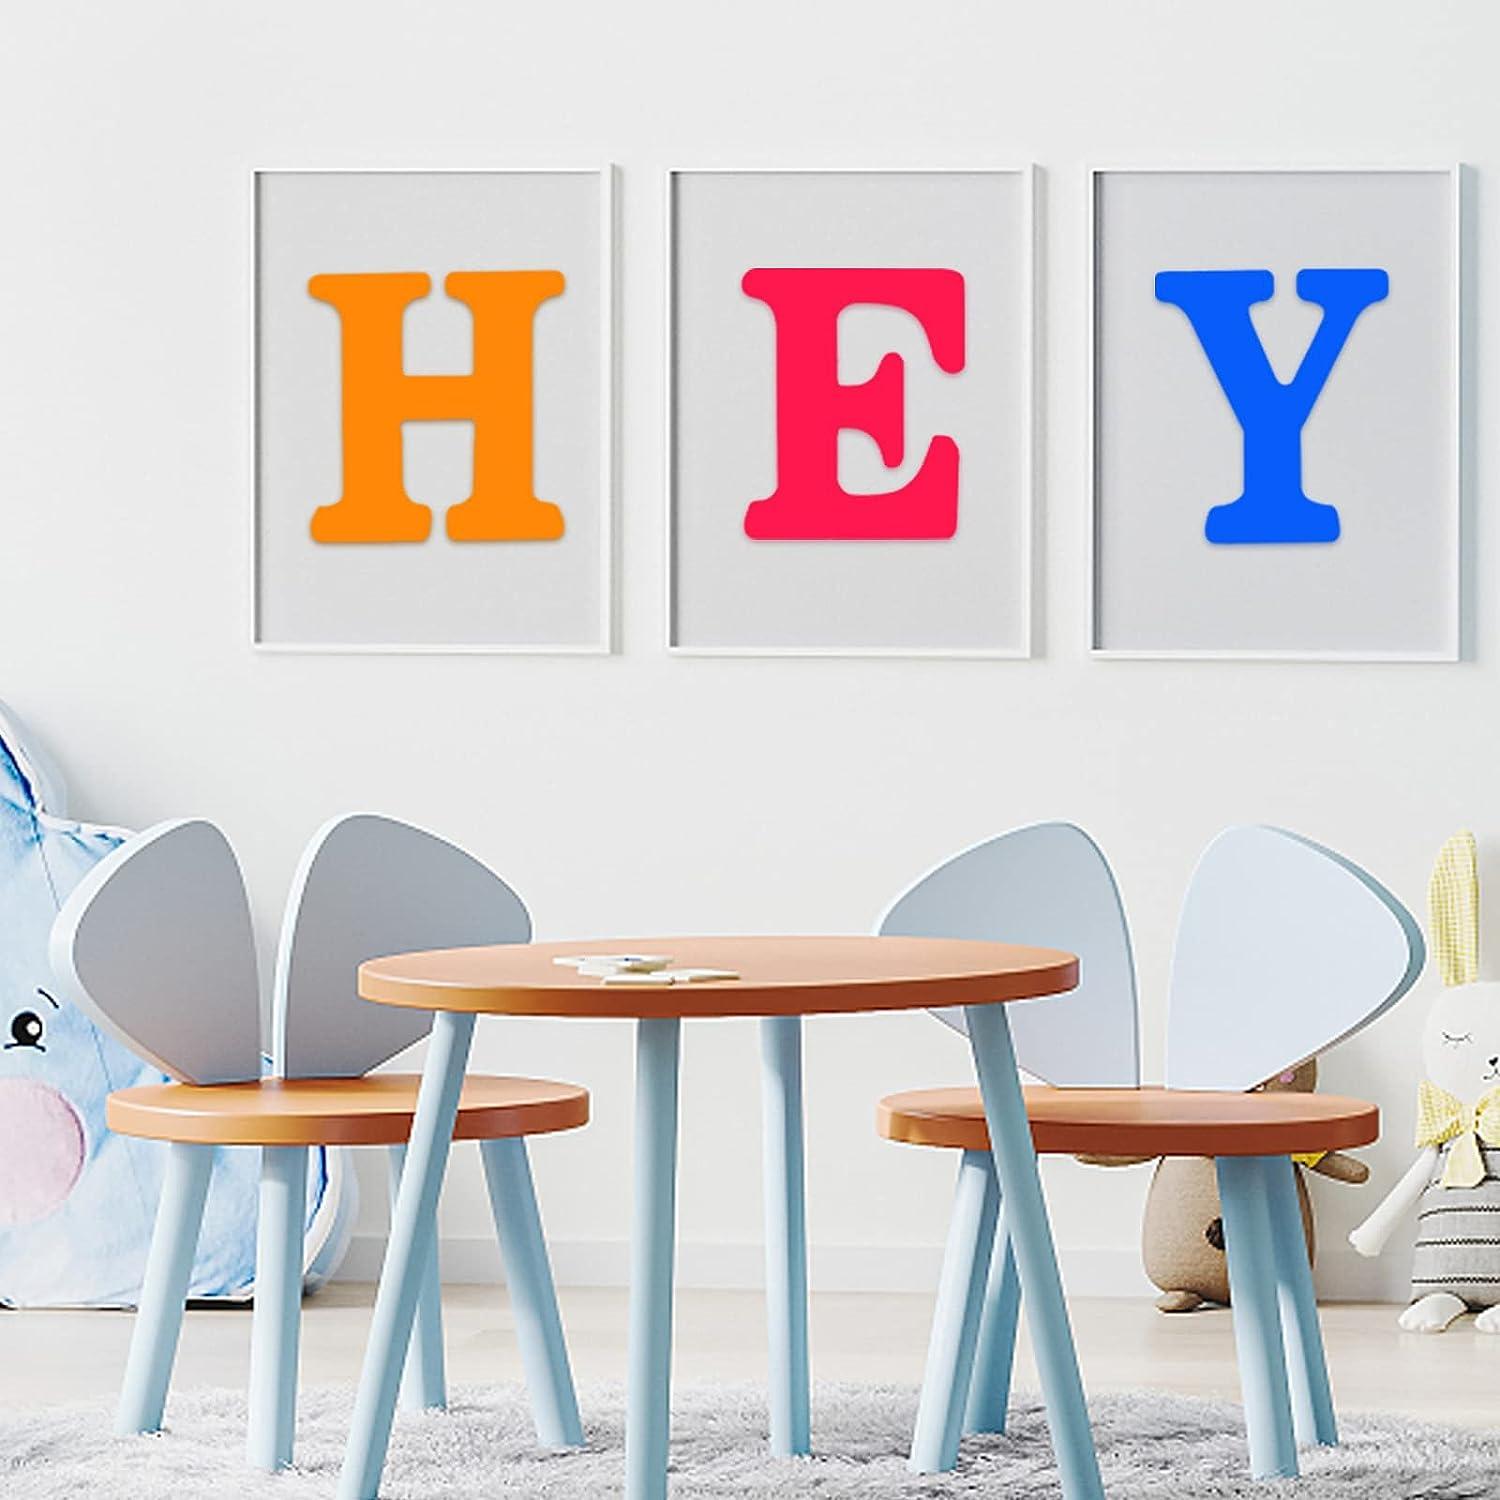 Craft Room Decor with Wood Letters